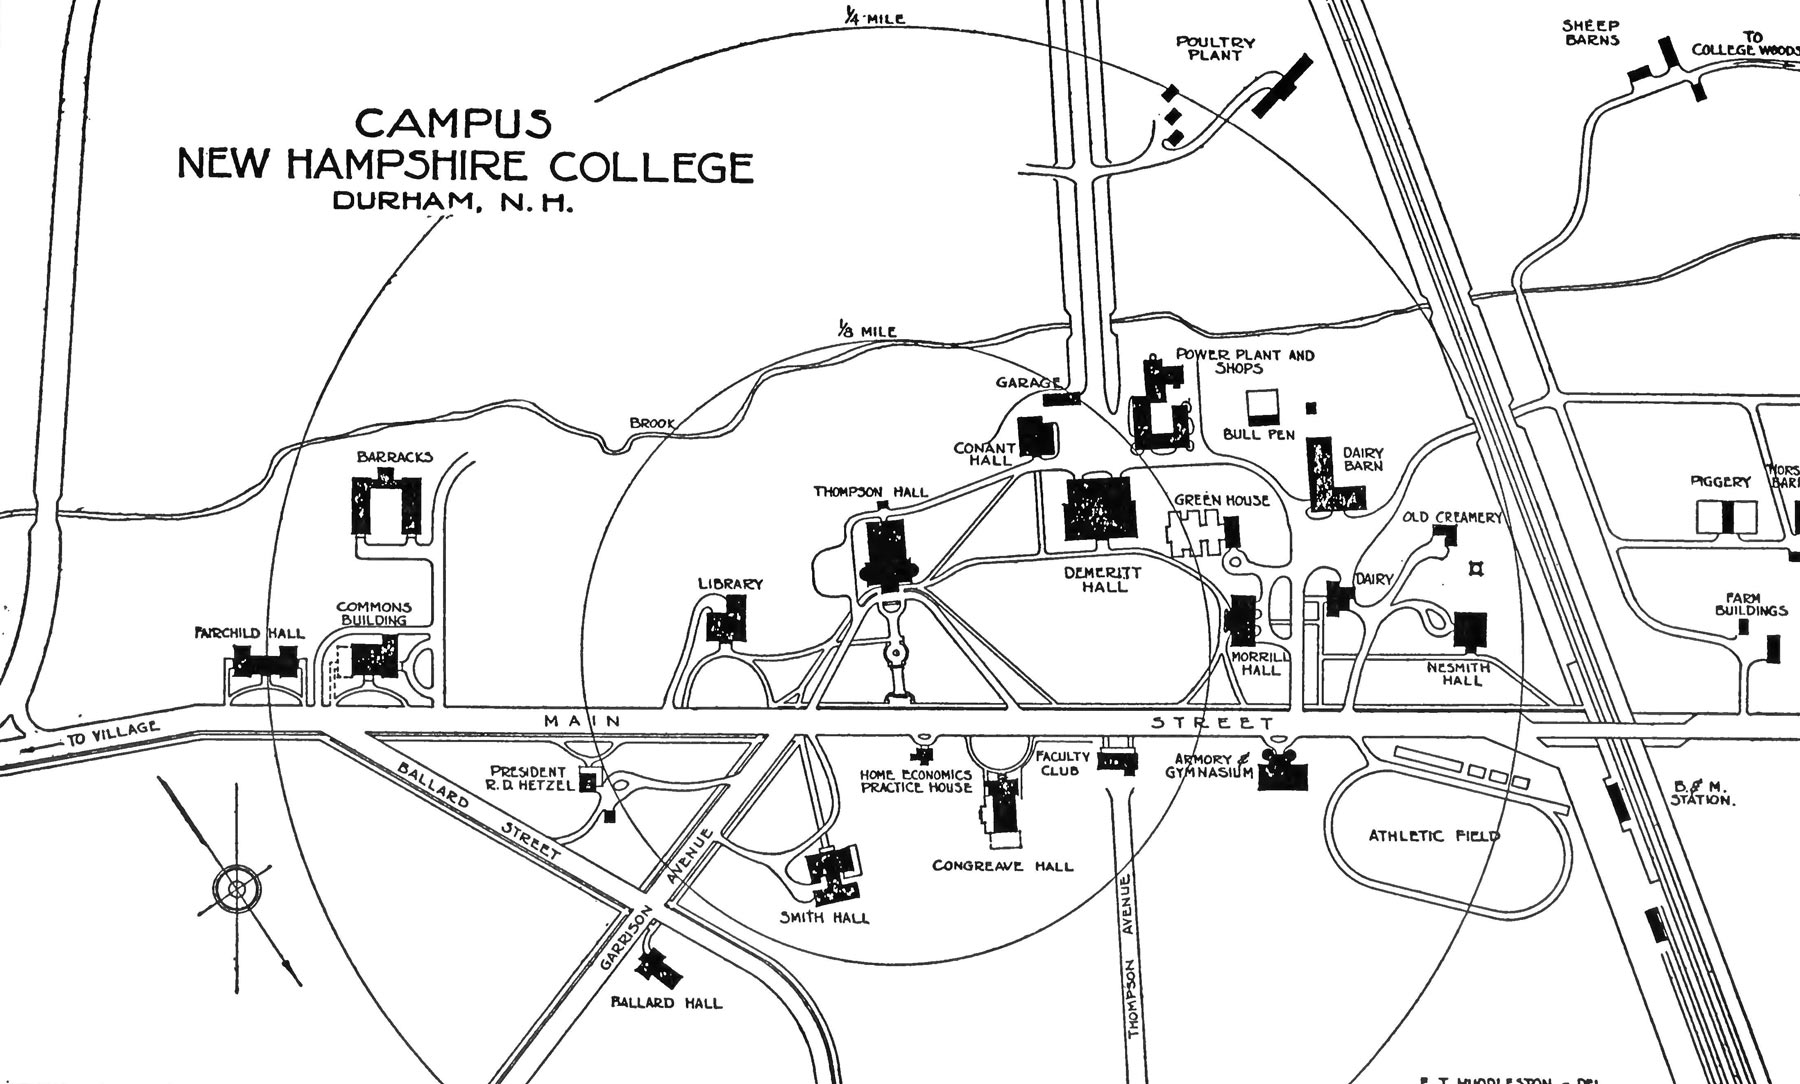 Old map/diagram of UNH campus grounds